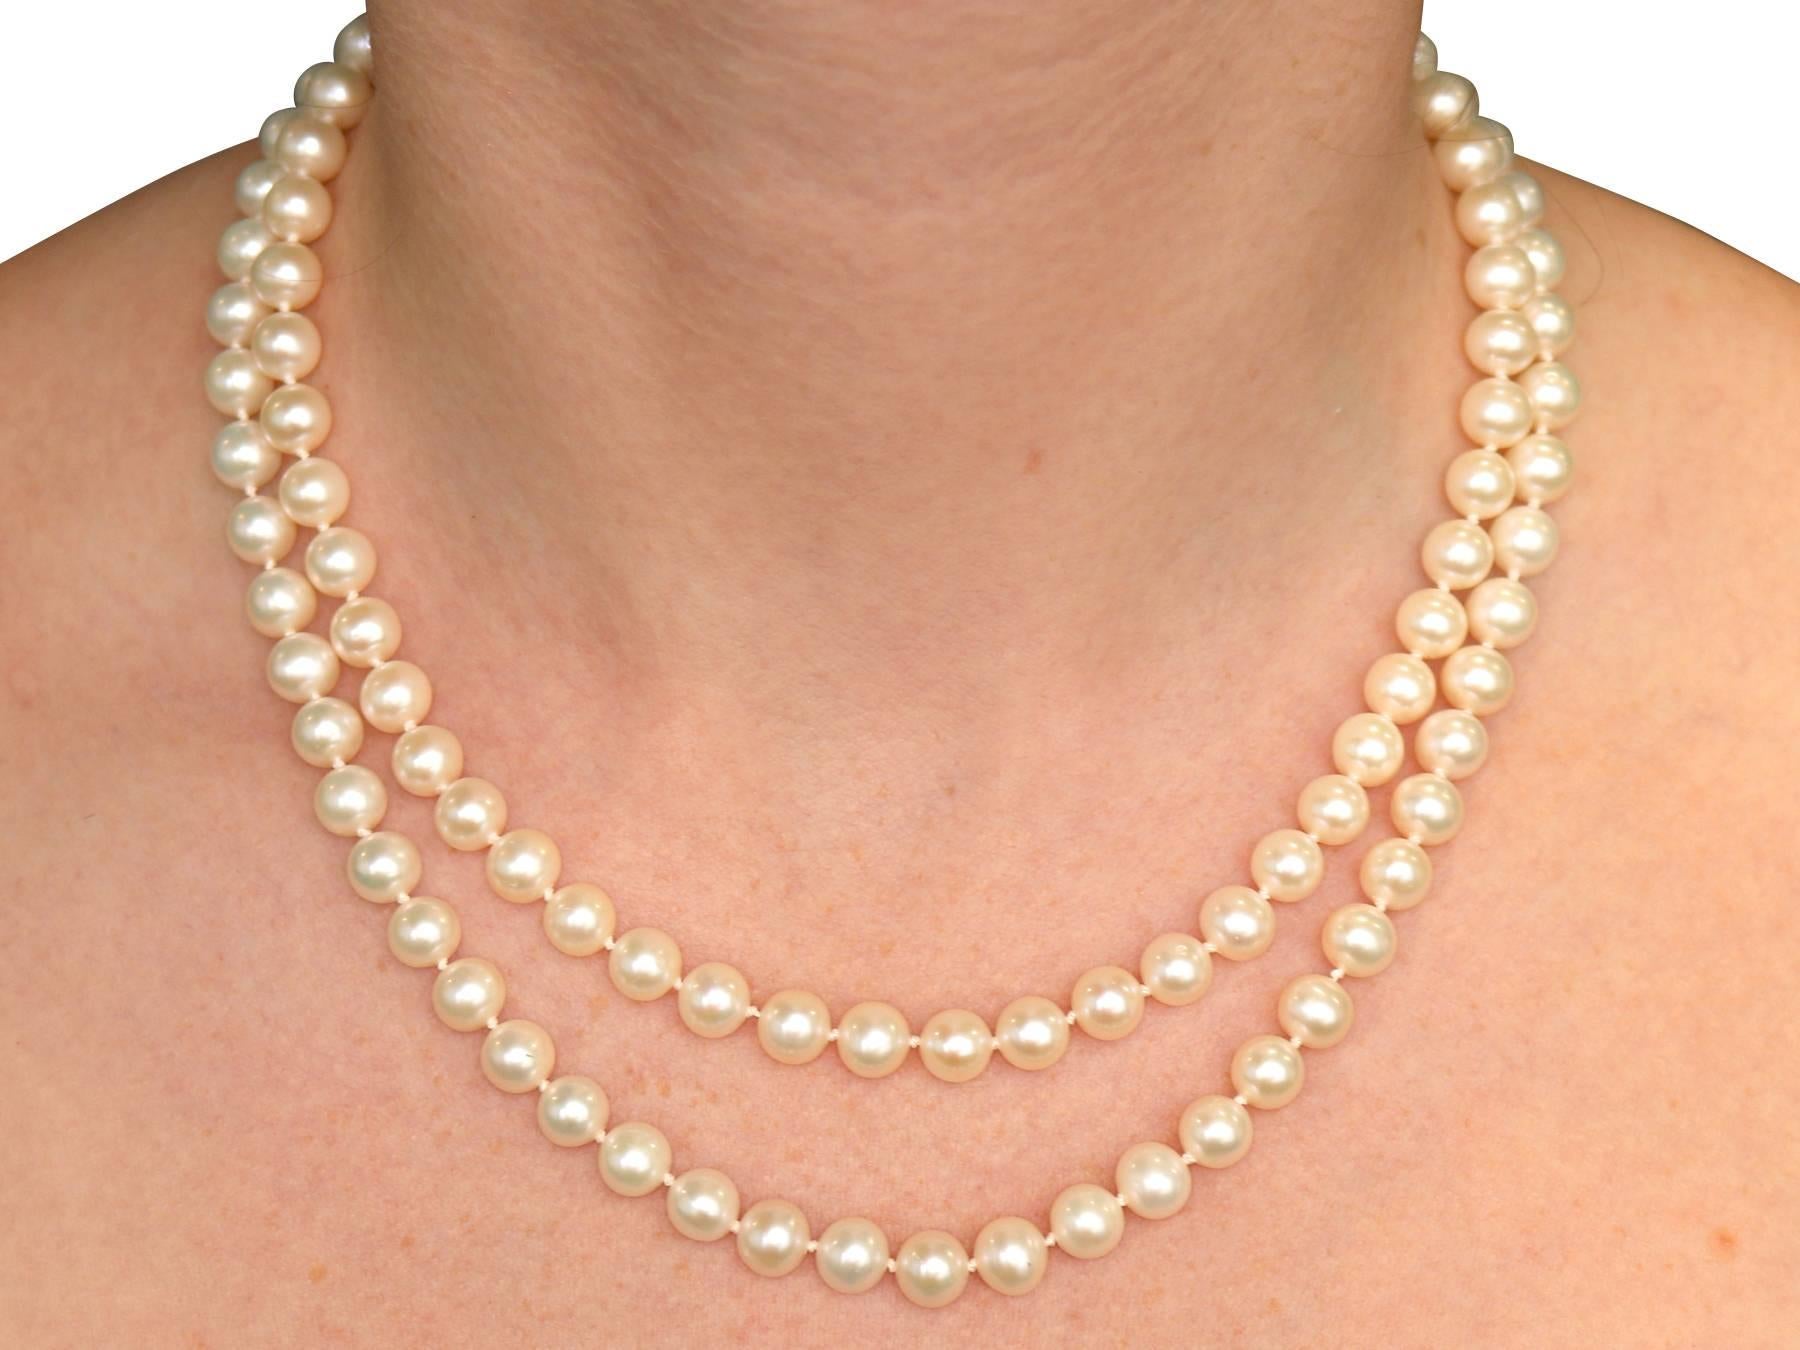 Women's or Men's 1970s Double Strand Pearl Necklace with Diamond Set Clasp